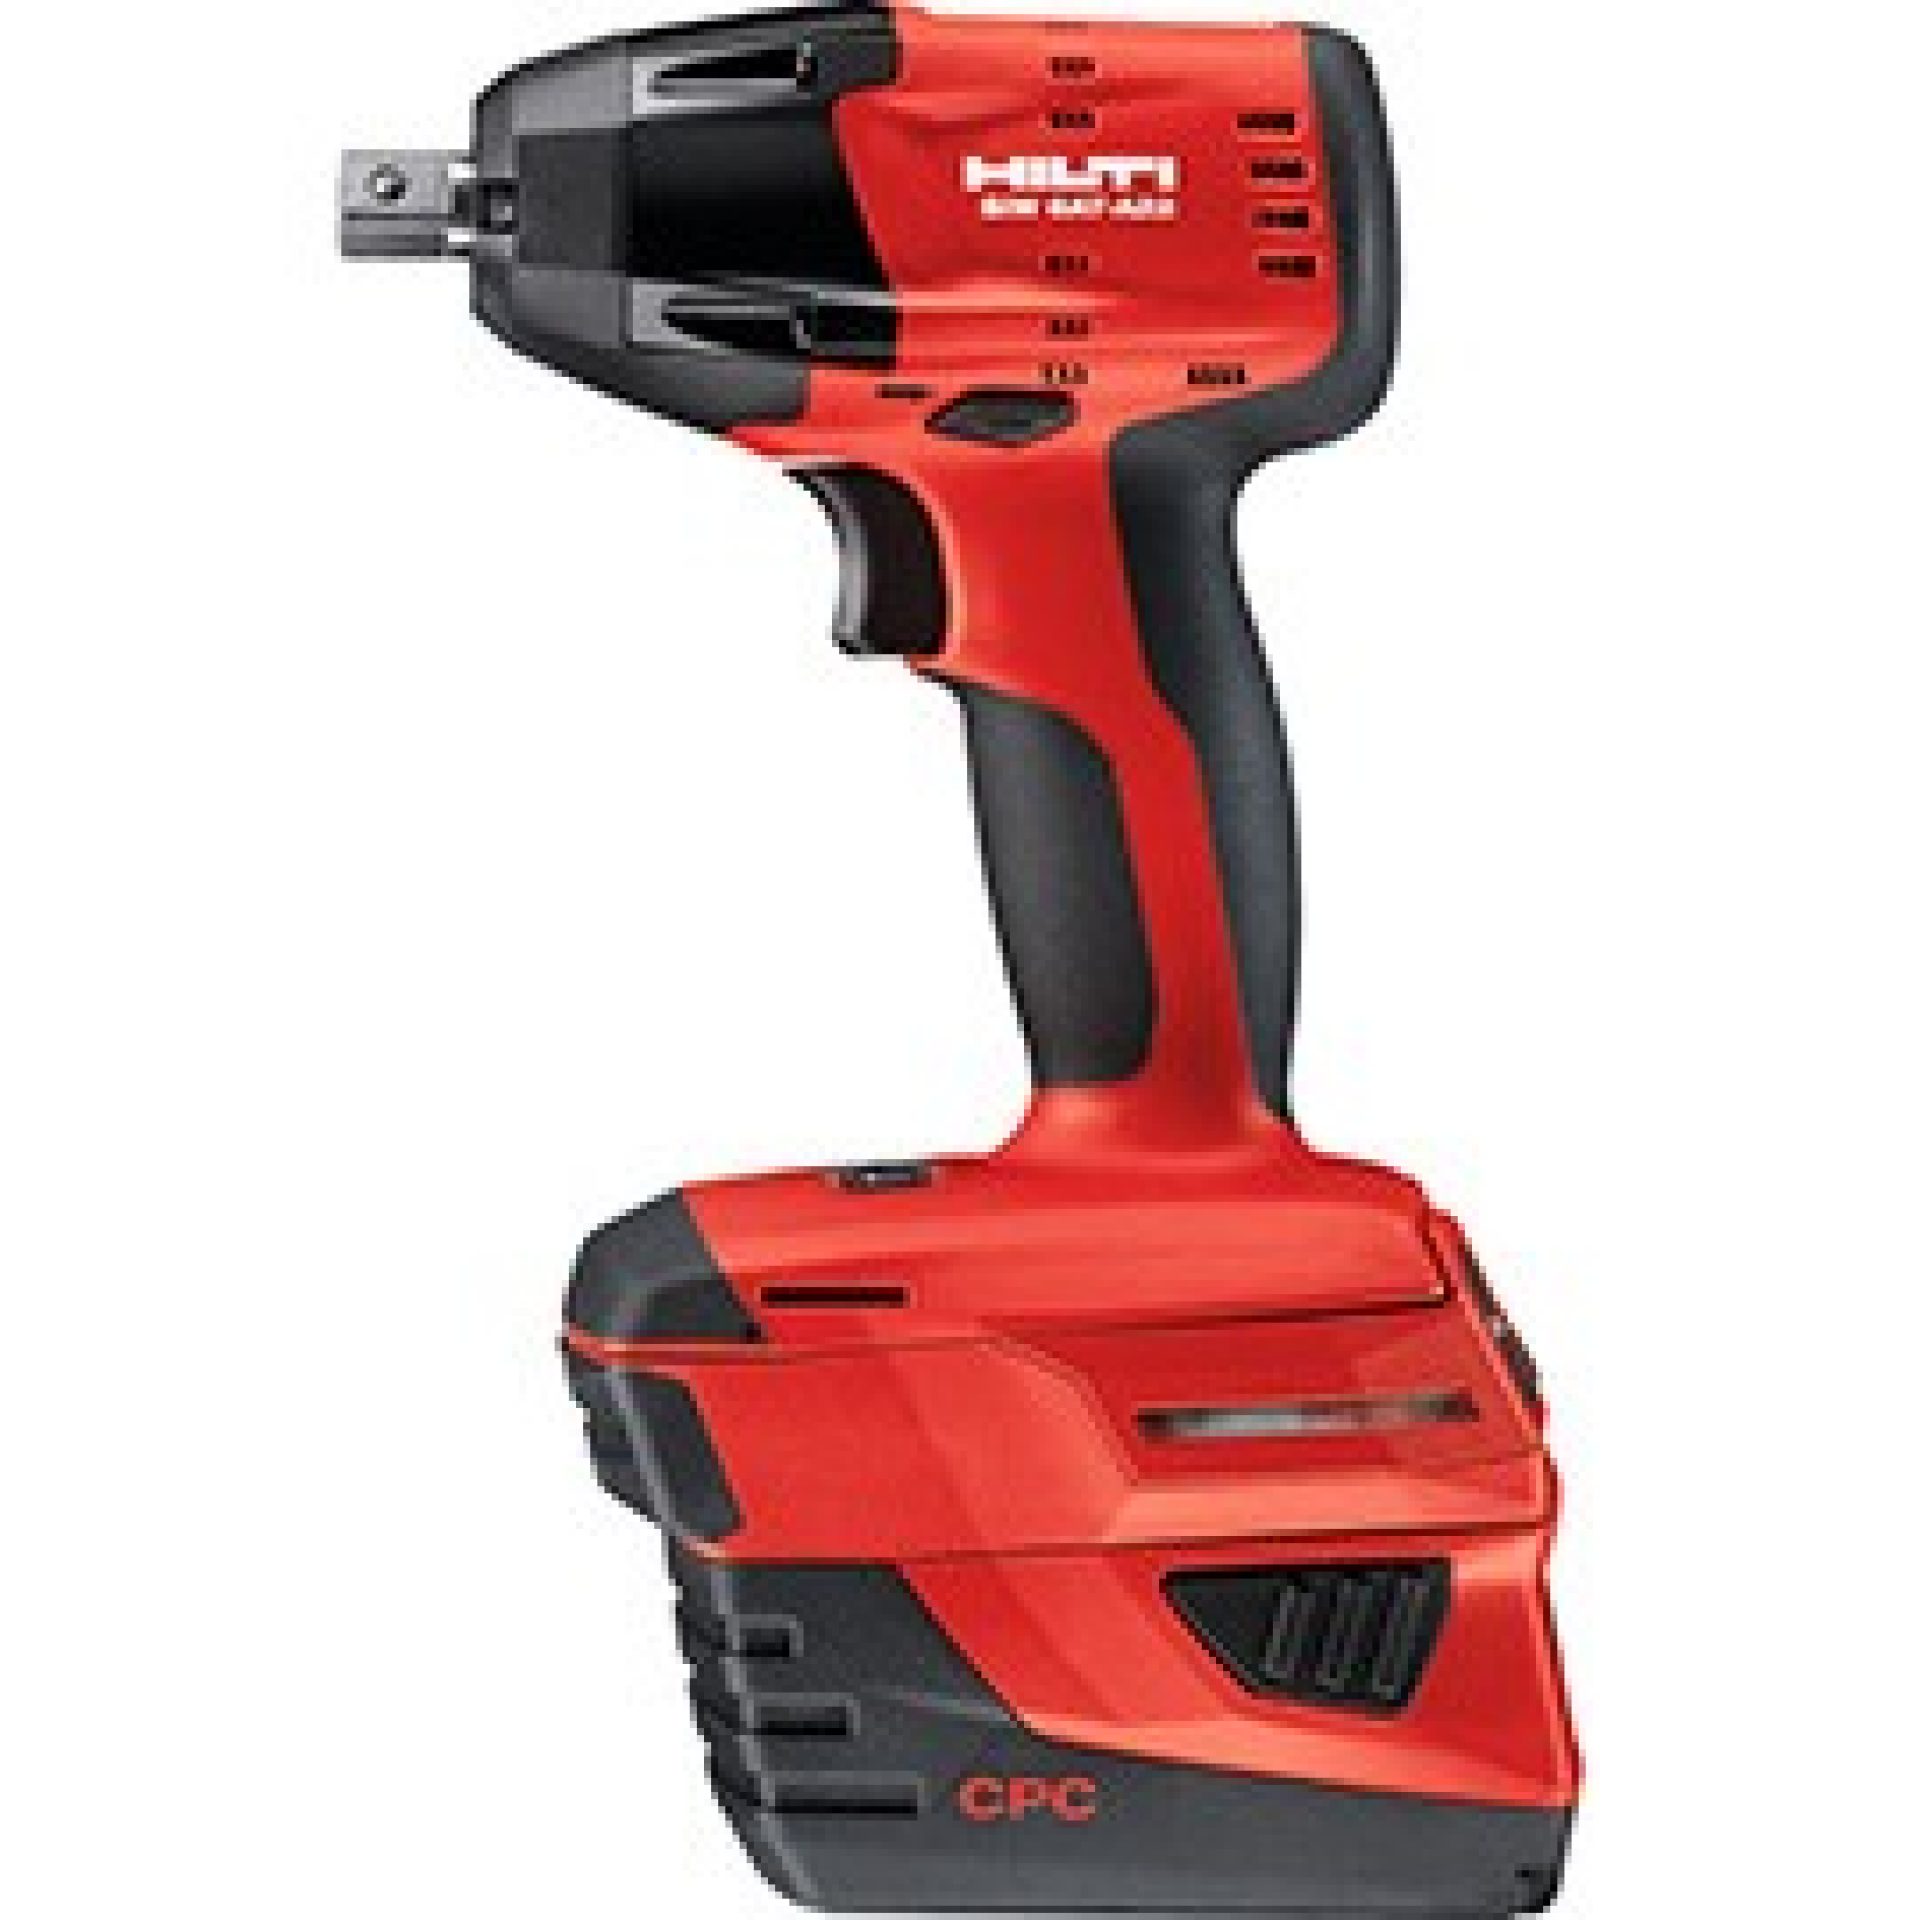 SIW 6AT-A22 impact wrench